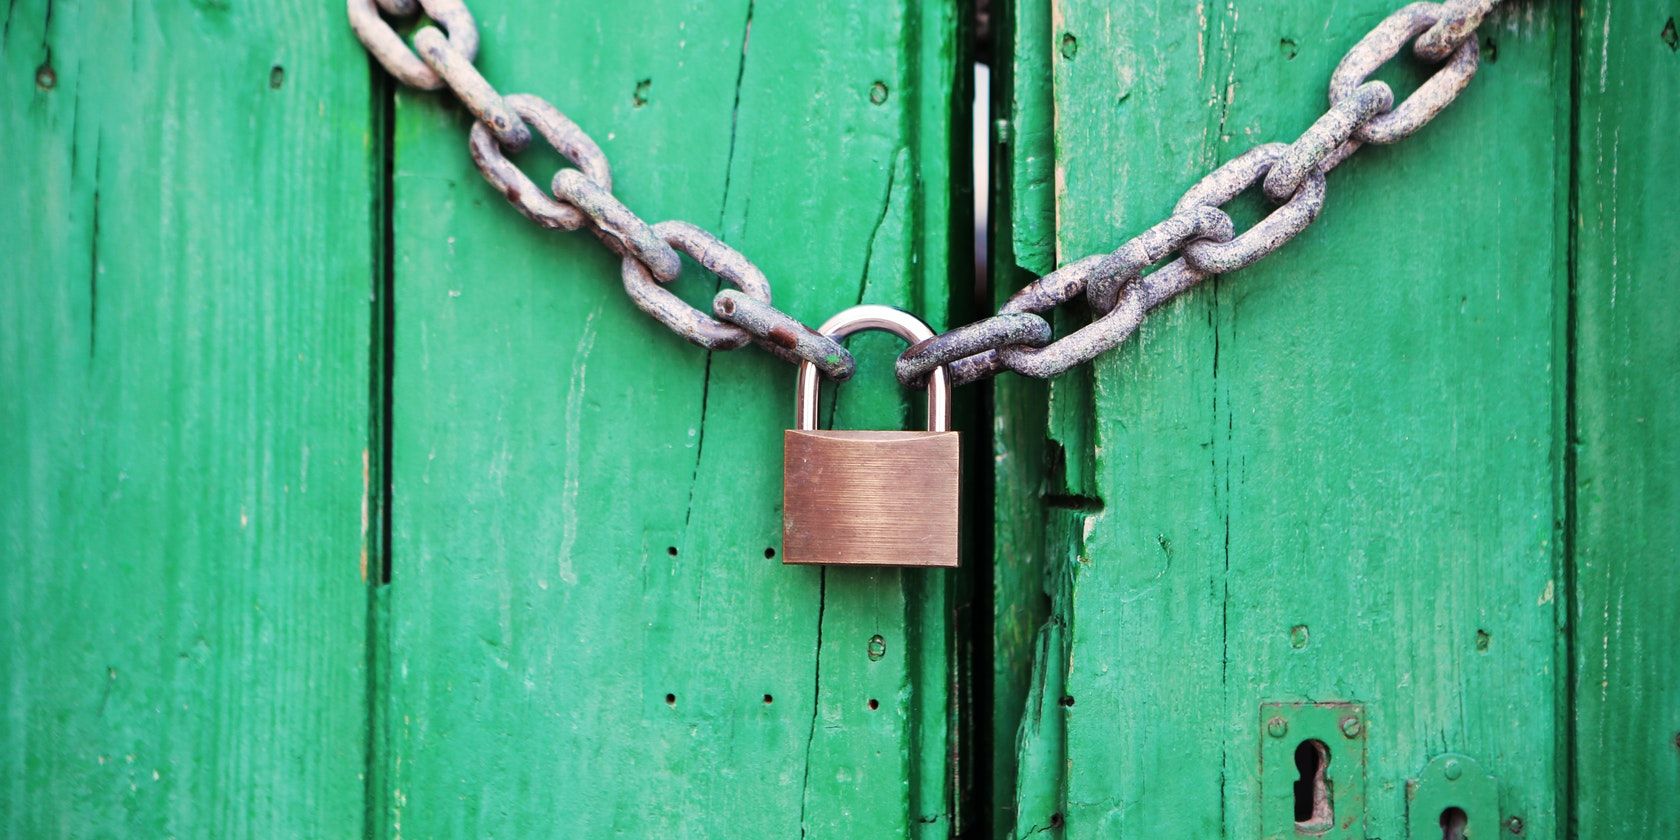 A green wooden door with a chain and padlock